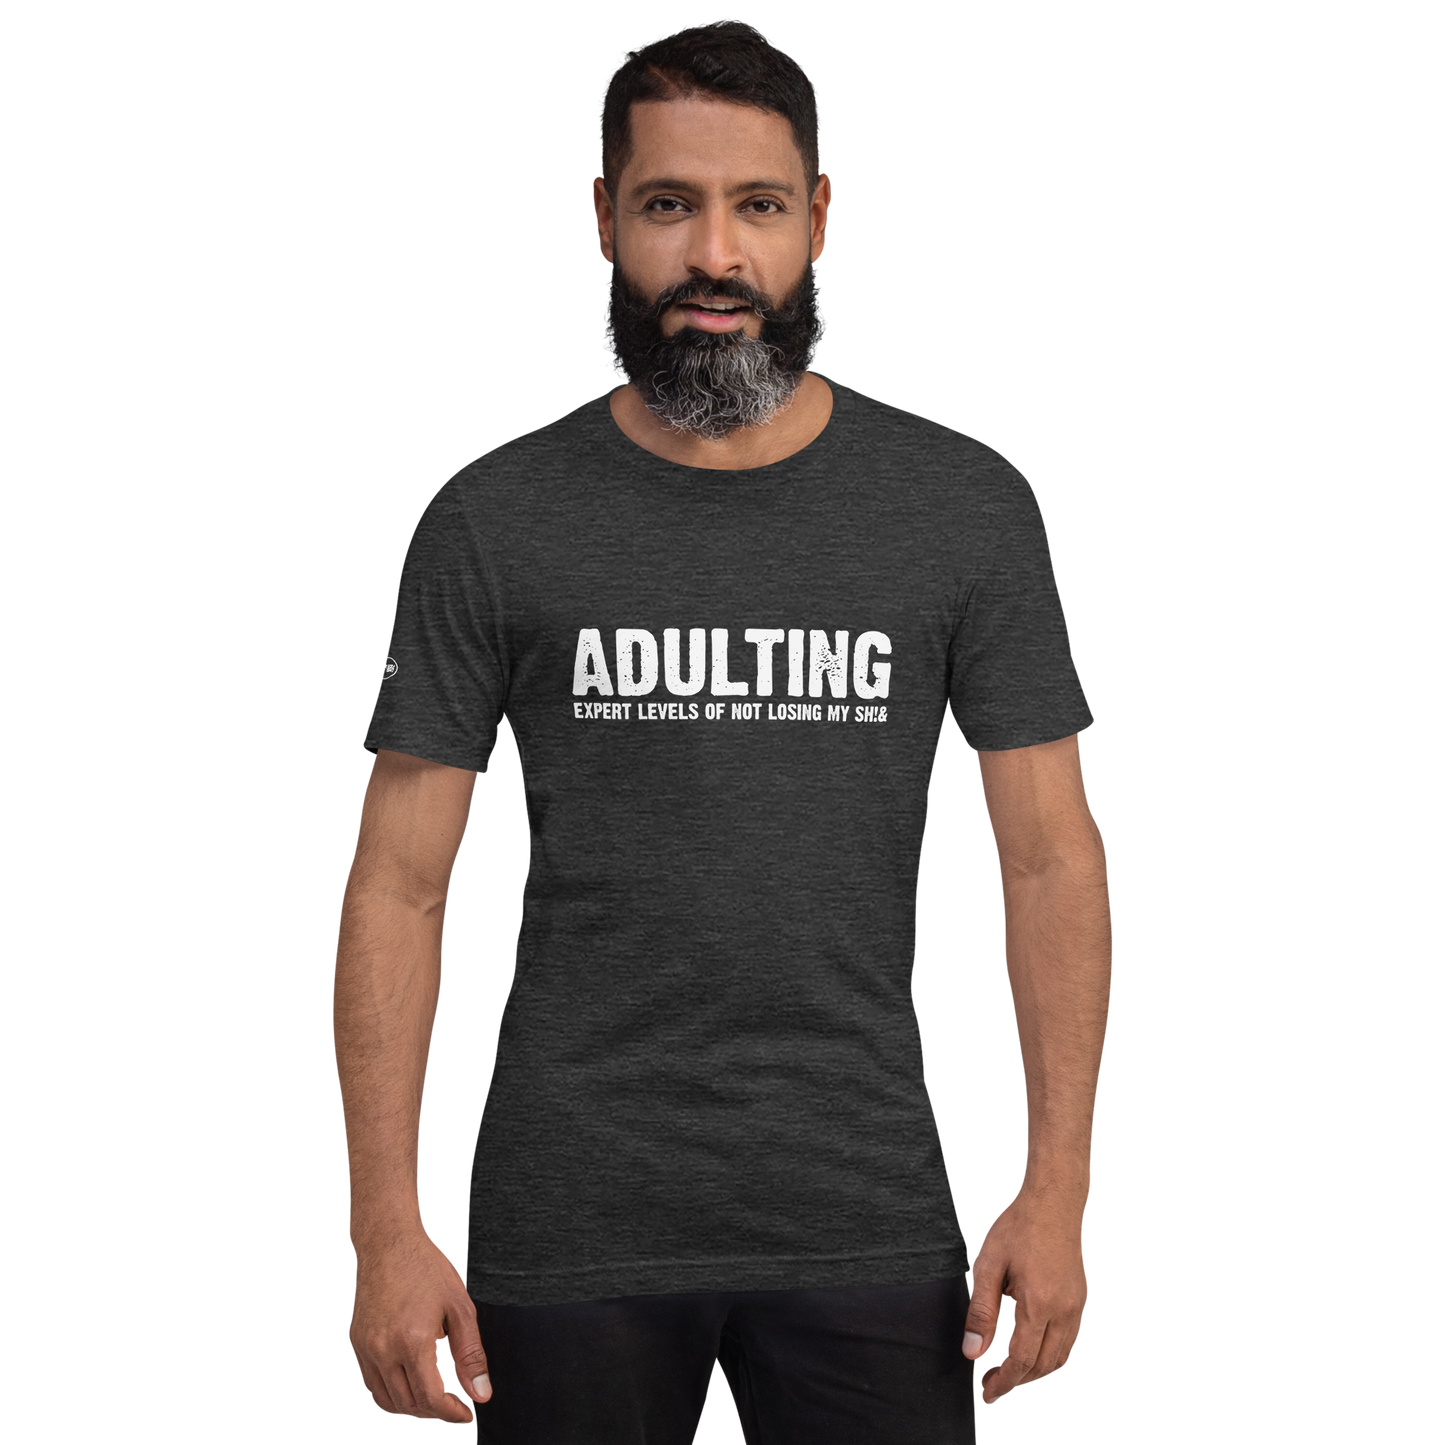 Adulting, Expert levels of not losing my sh!& - Funny T-Shirt